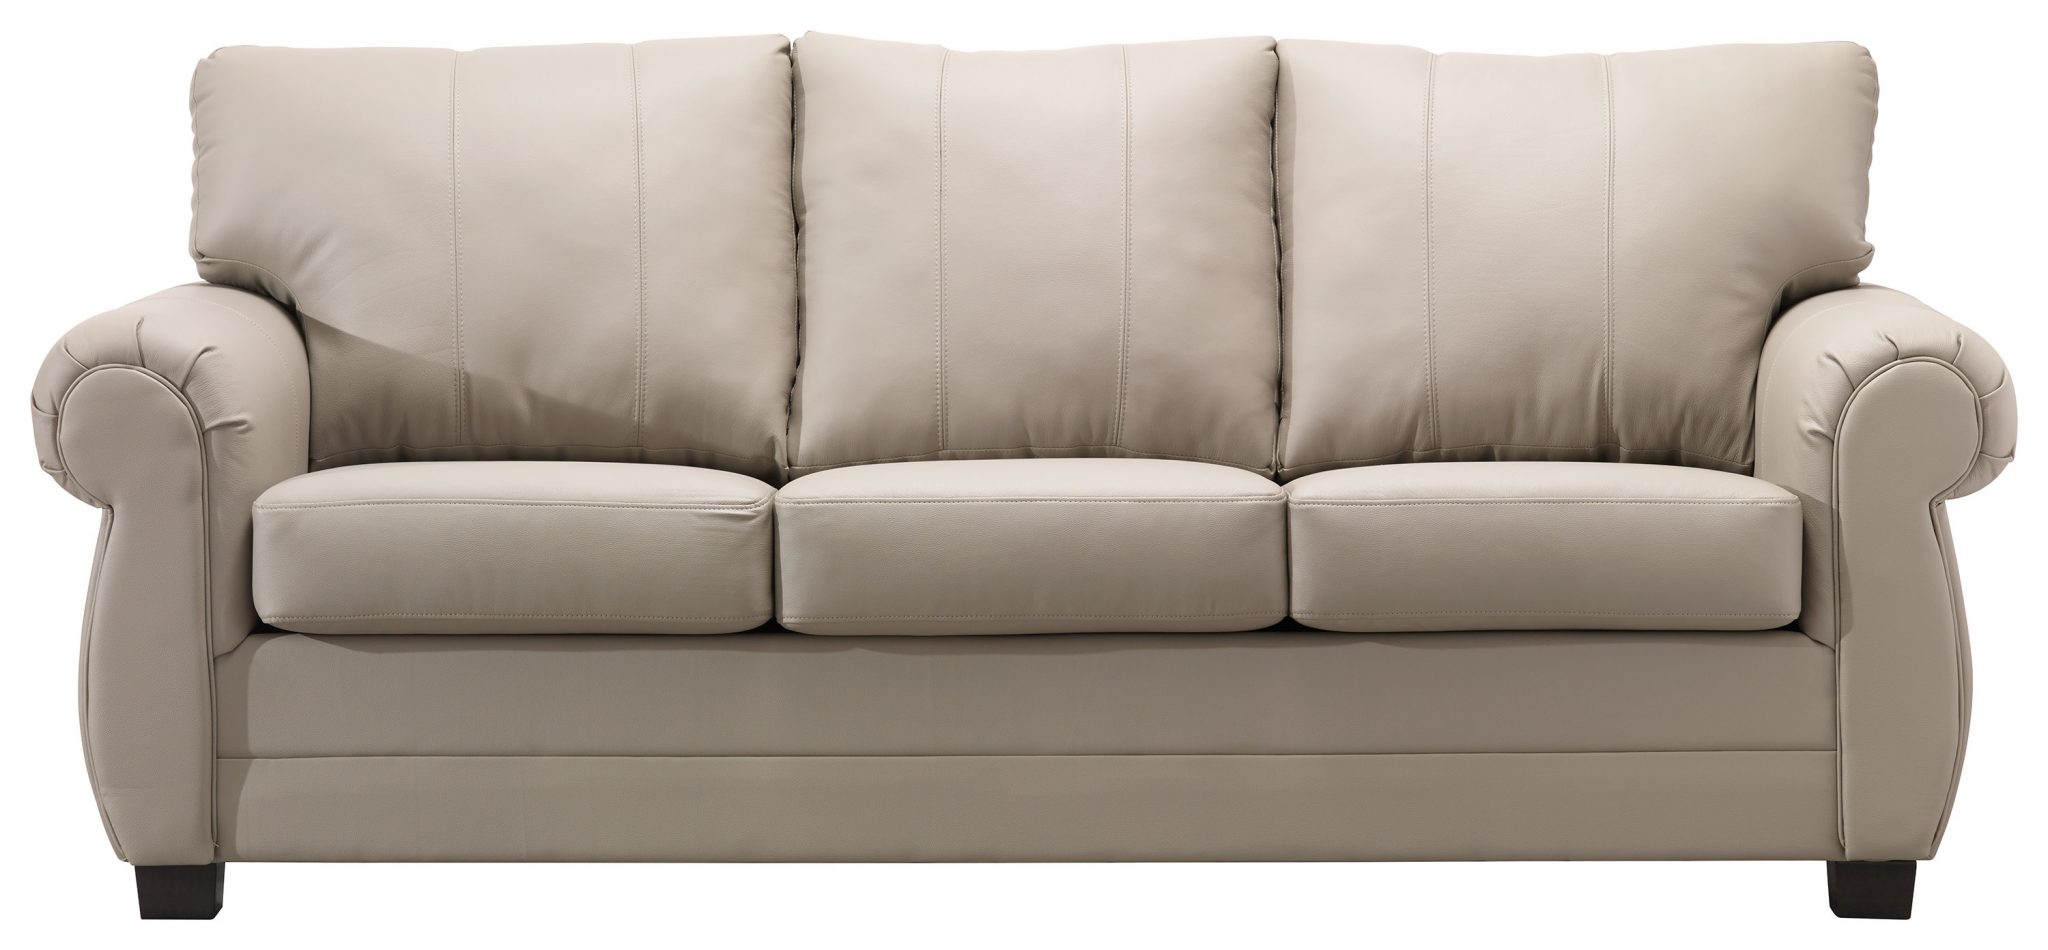 leather air leather match sofa